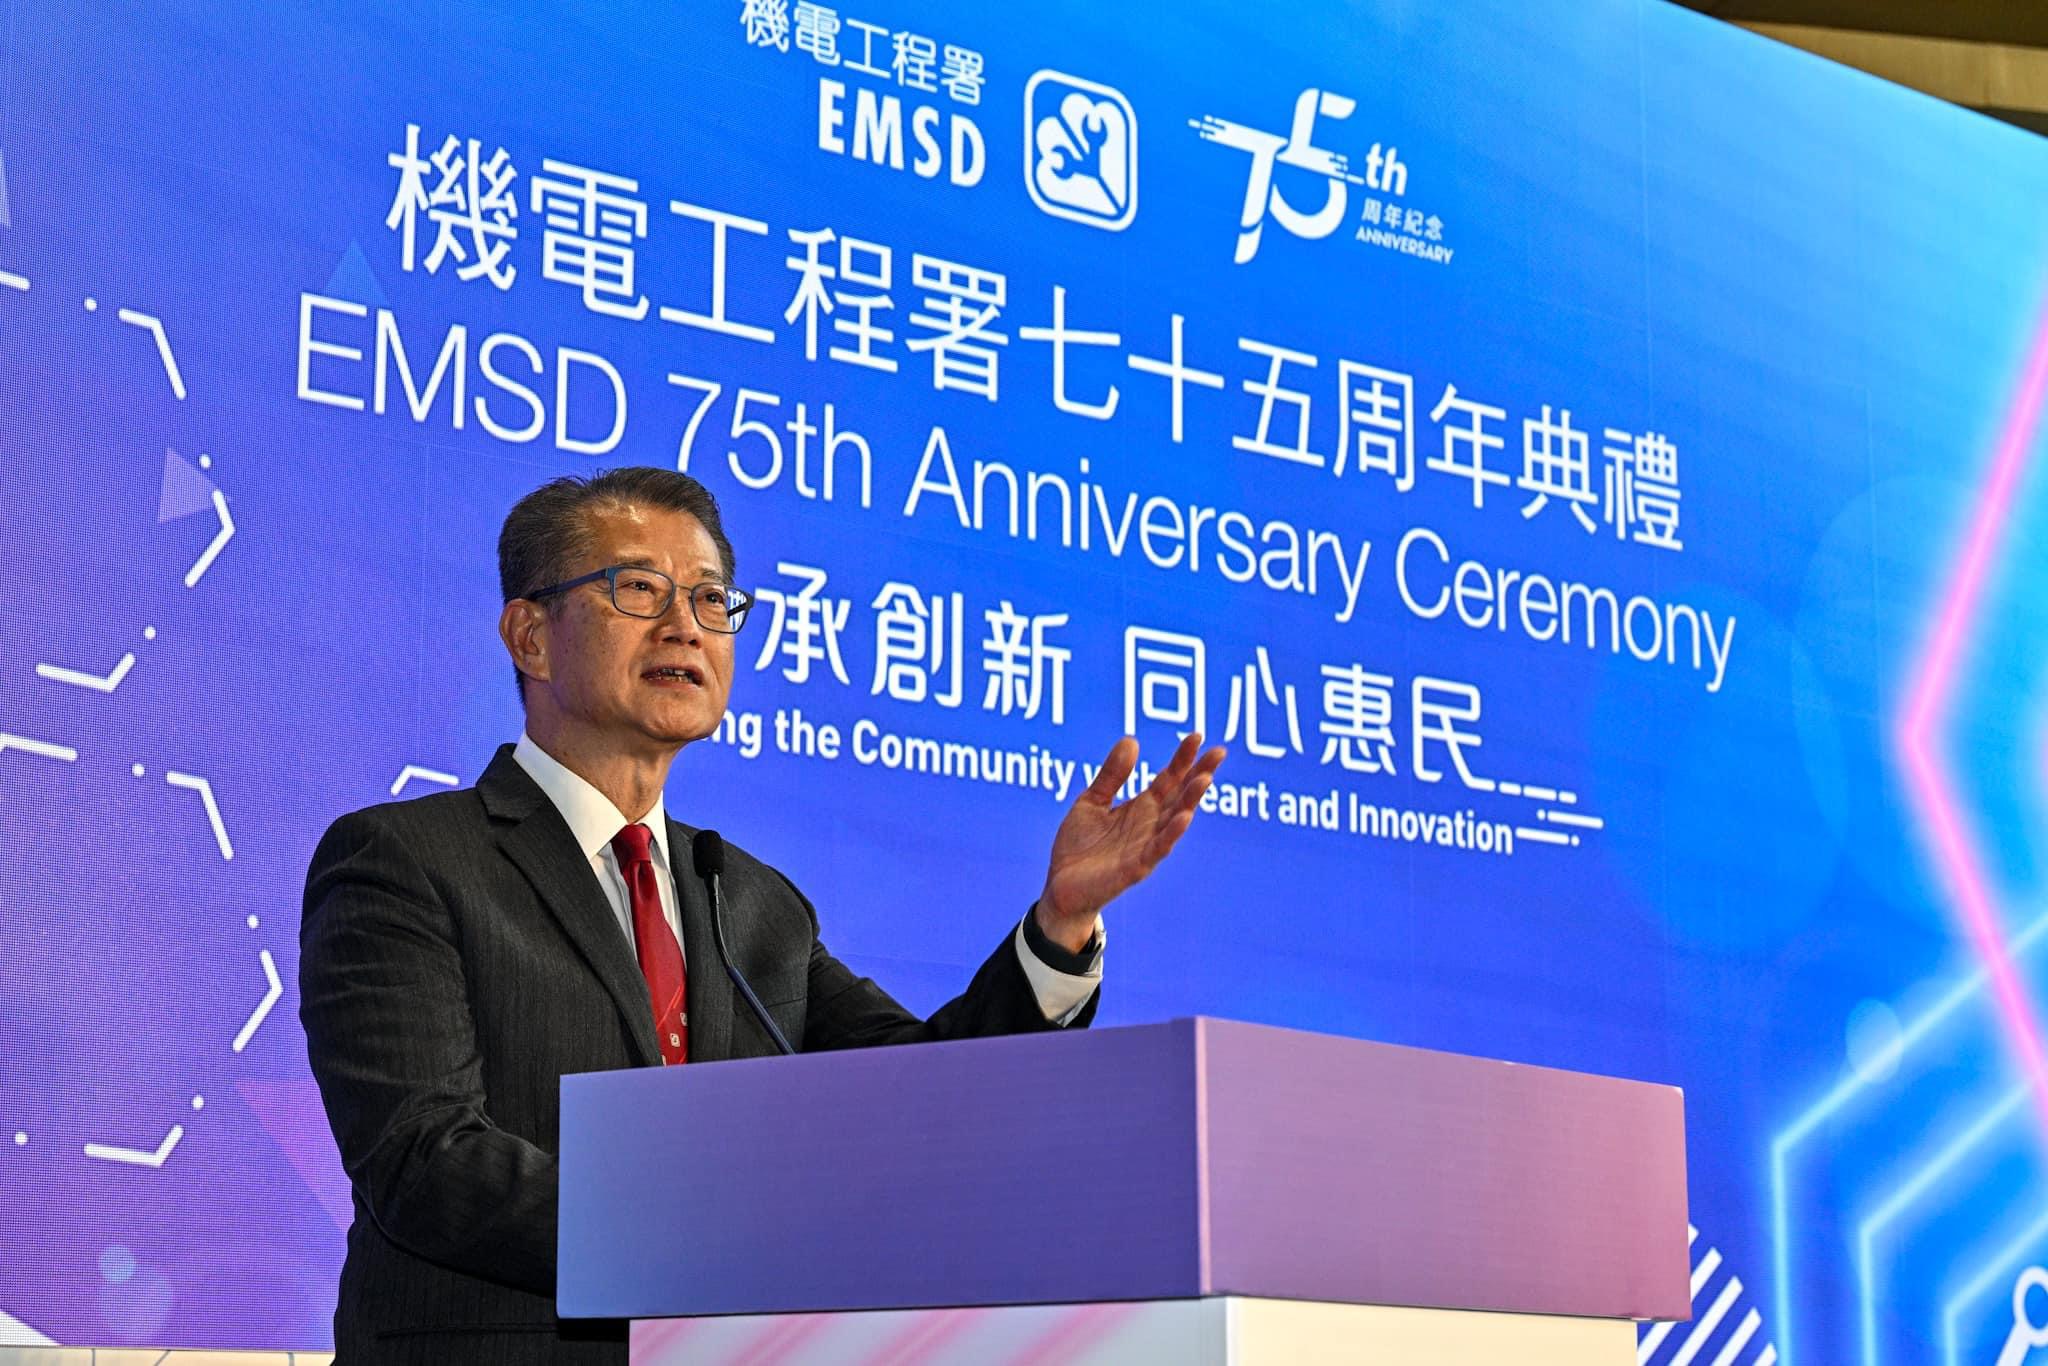 Mr. Paul Chan, Financial Secretary, officiated at the EMSD 75th Anniversary Ceremony and delivered a speech.